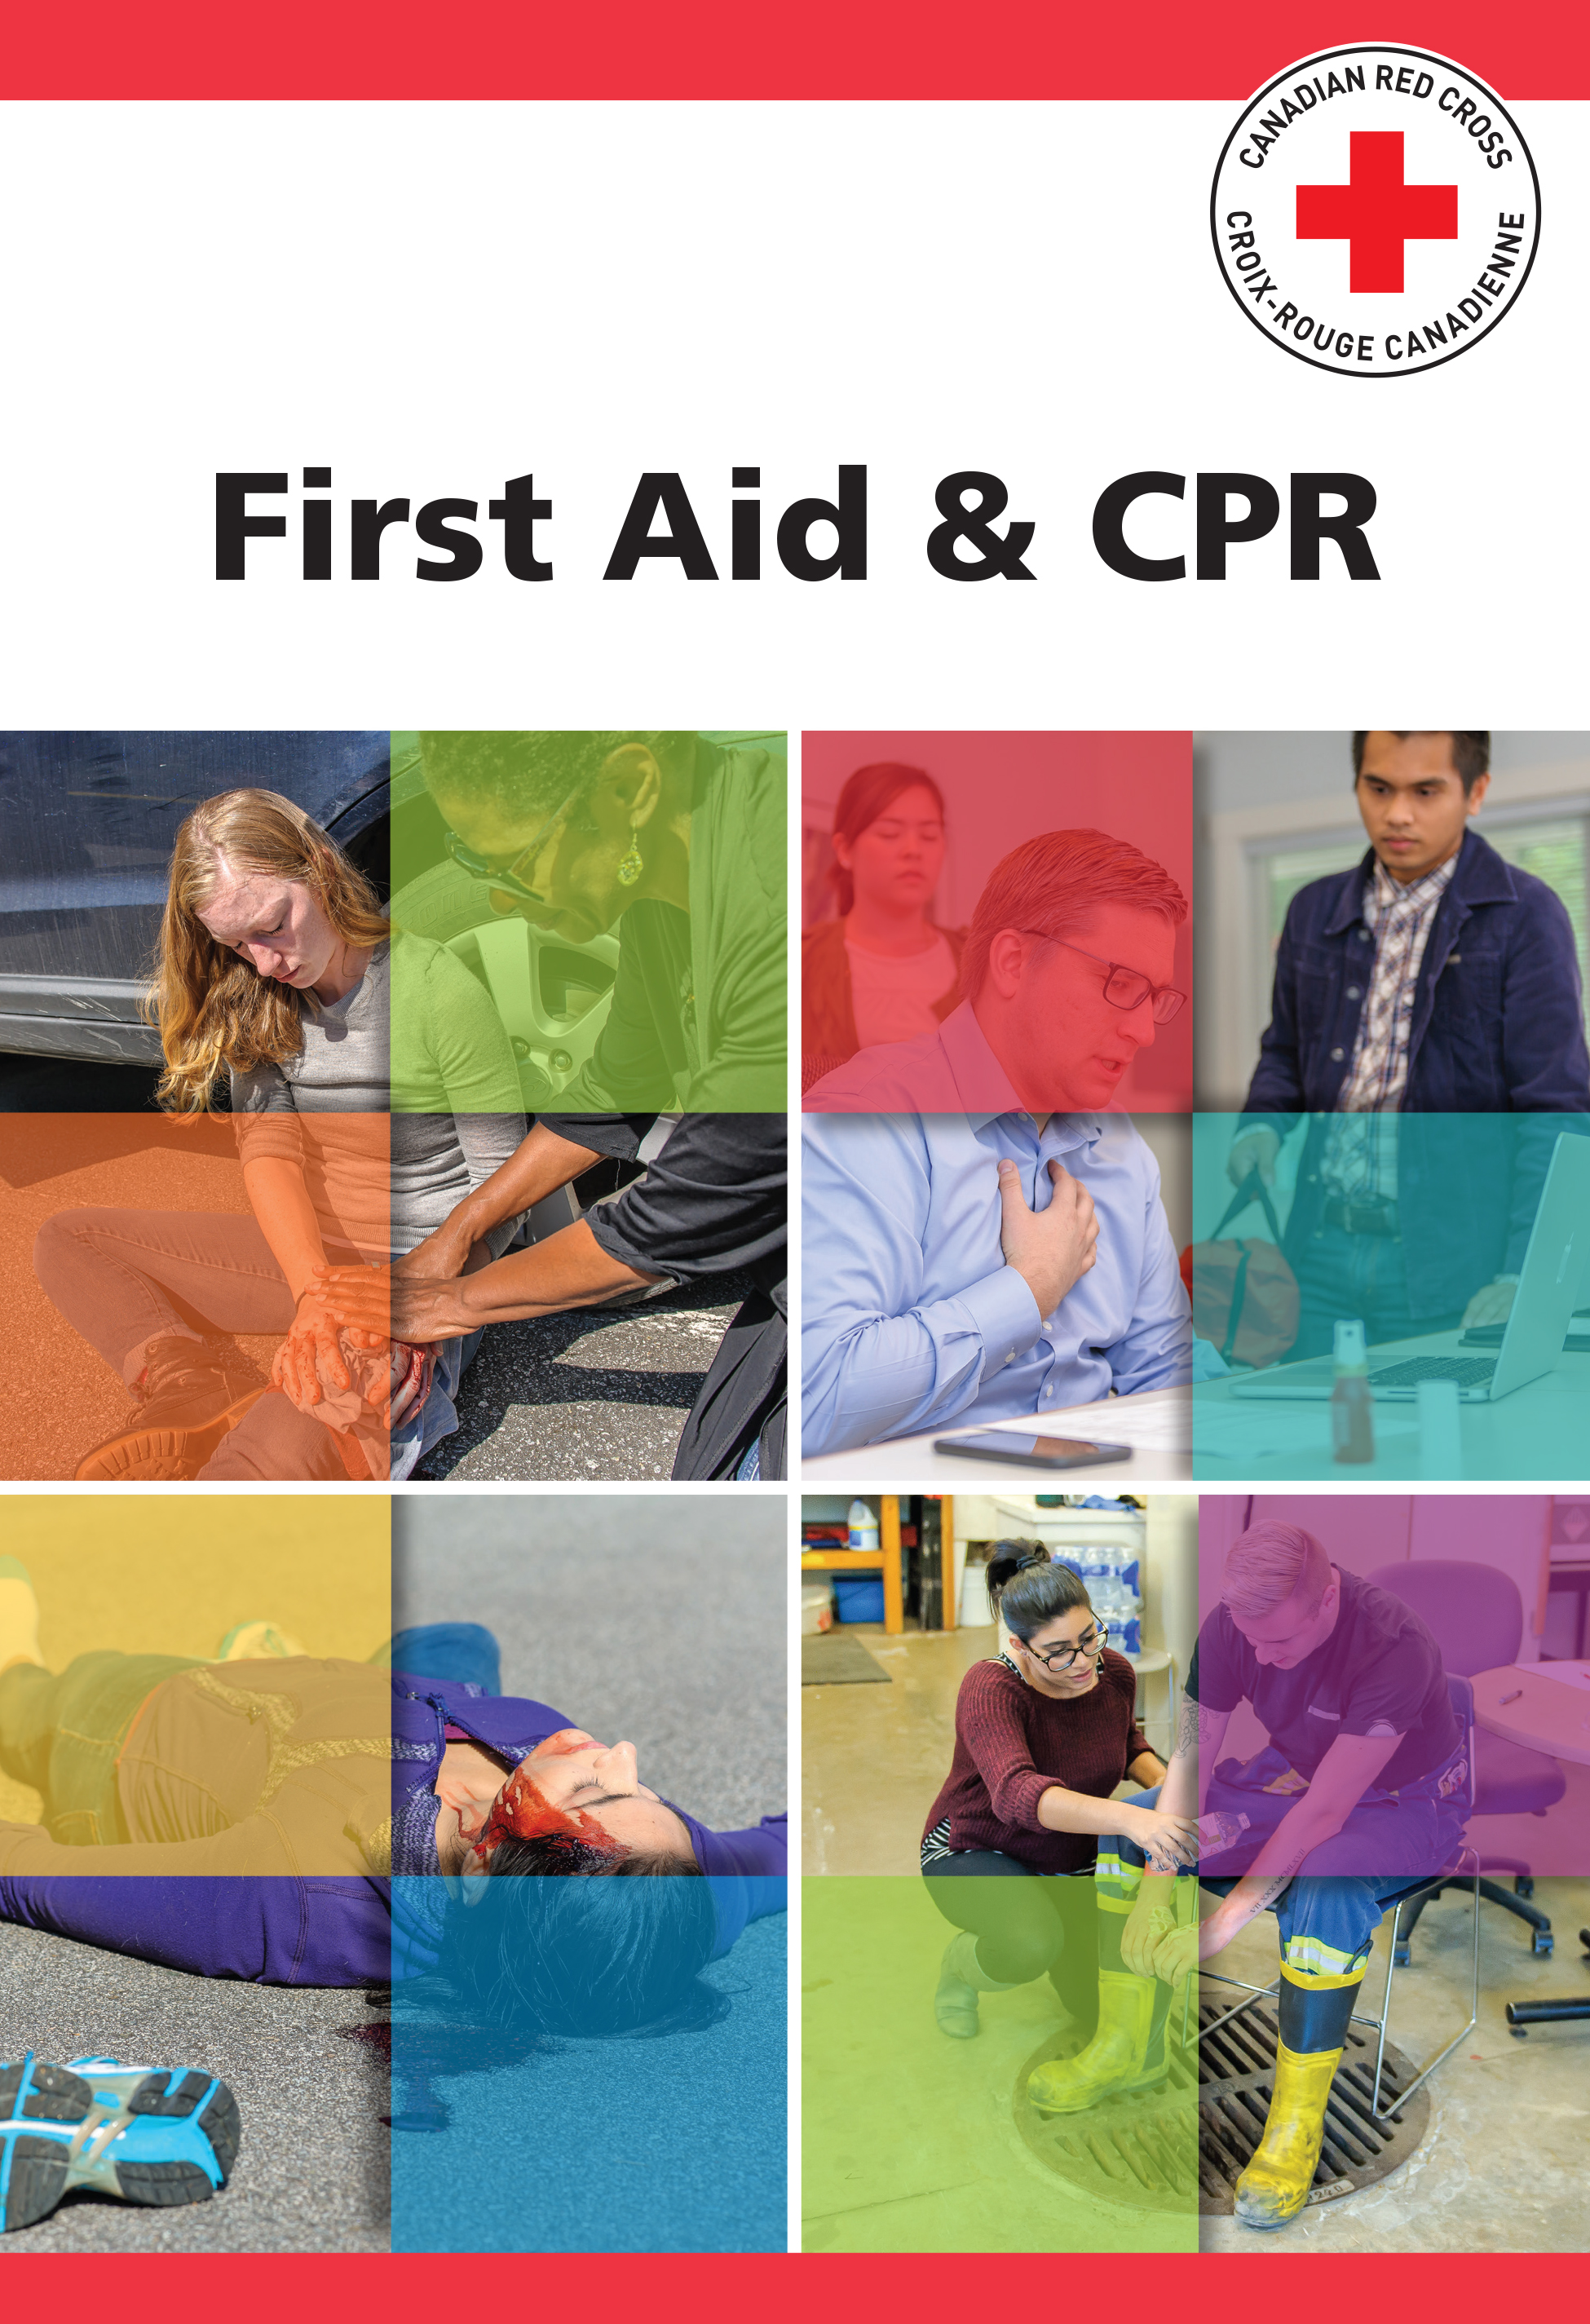 First Aid Course Materials for Marine Basic First Aid and CPR Level C (Blended)